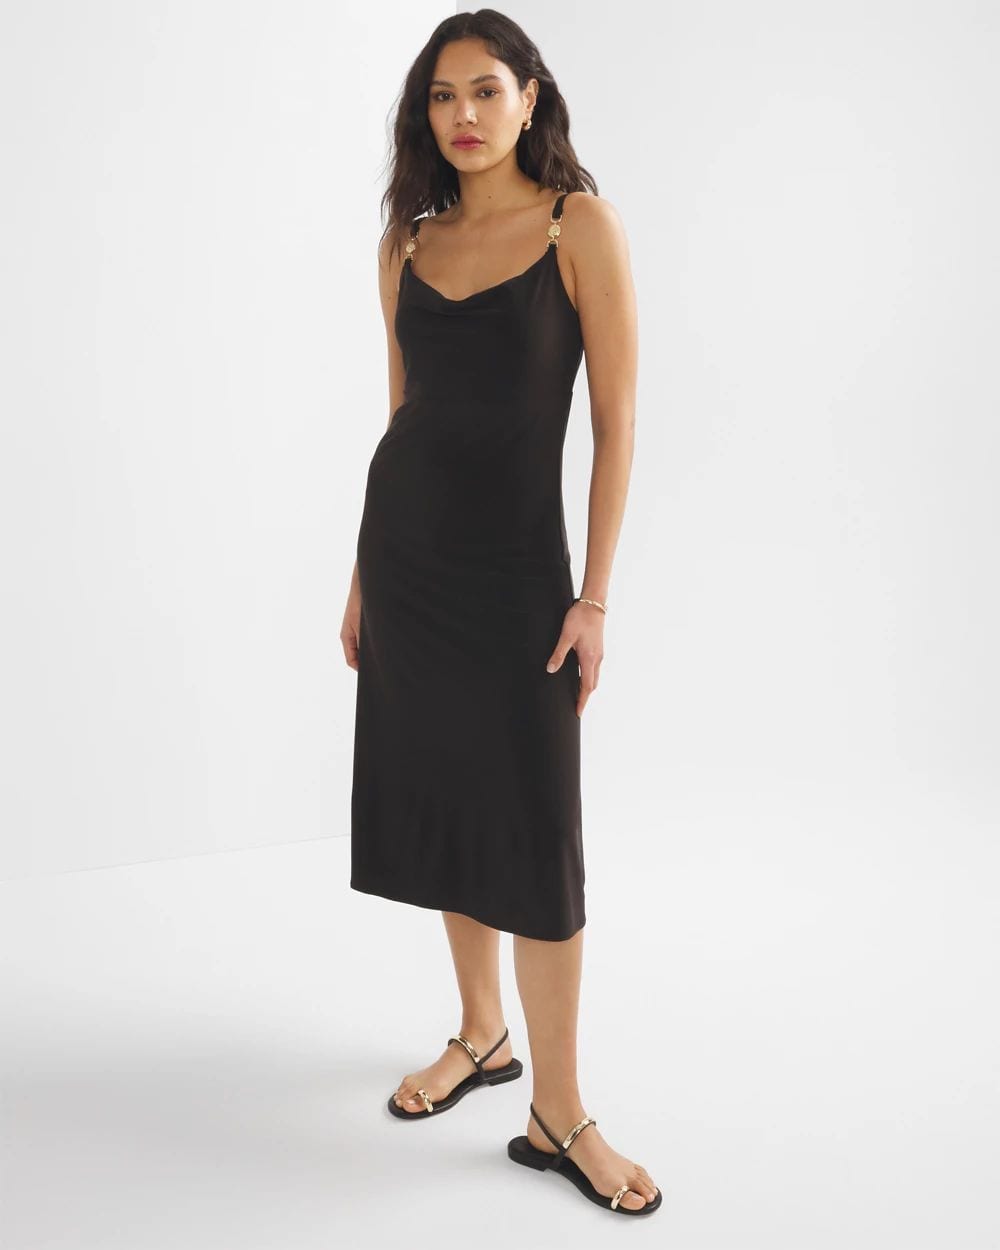 Cowl Neck Slip Dress click to view larger image.